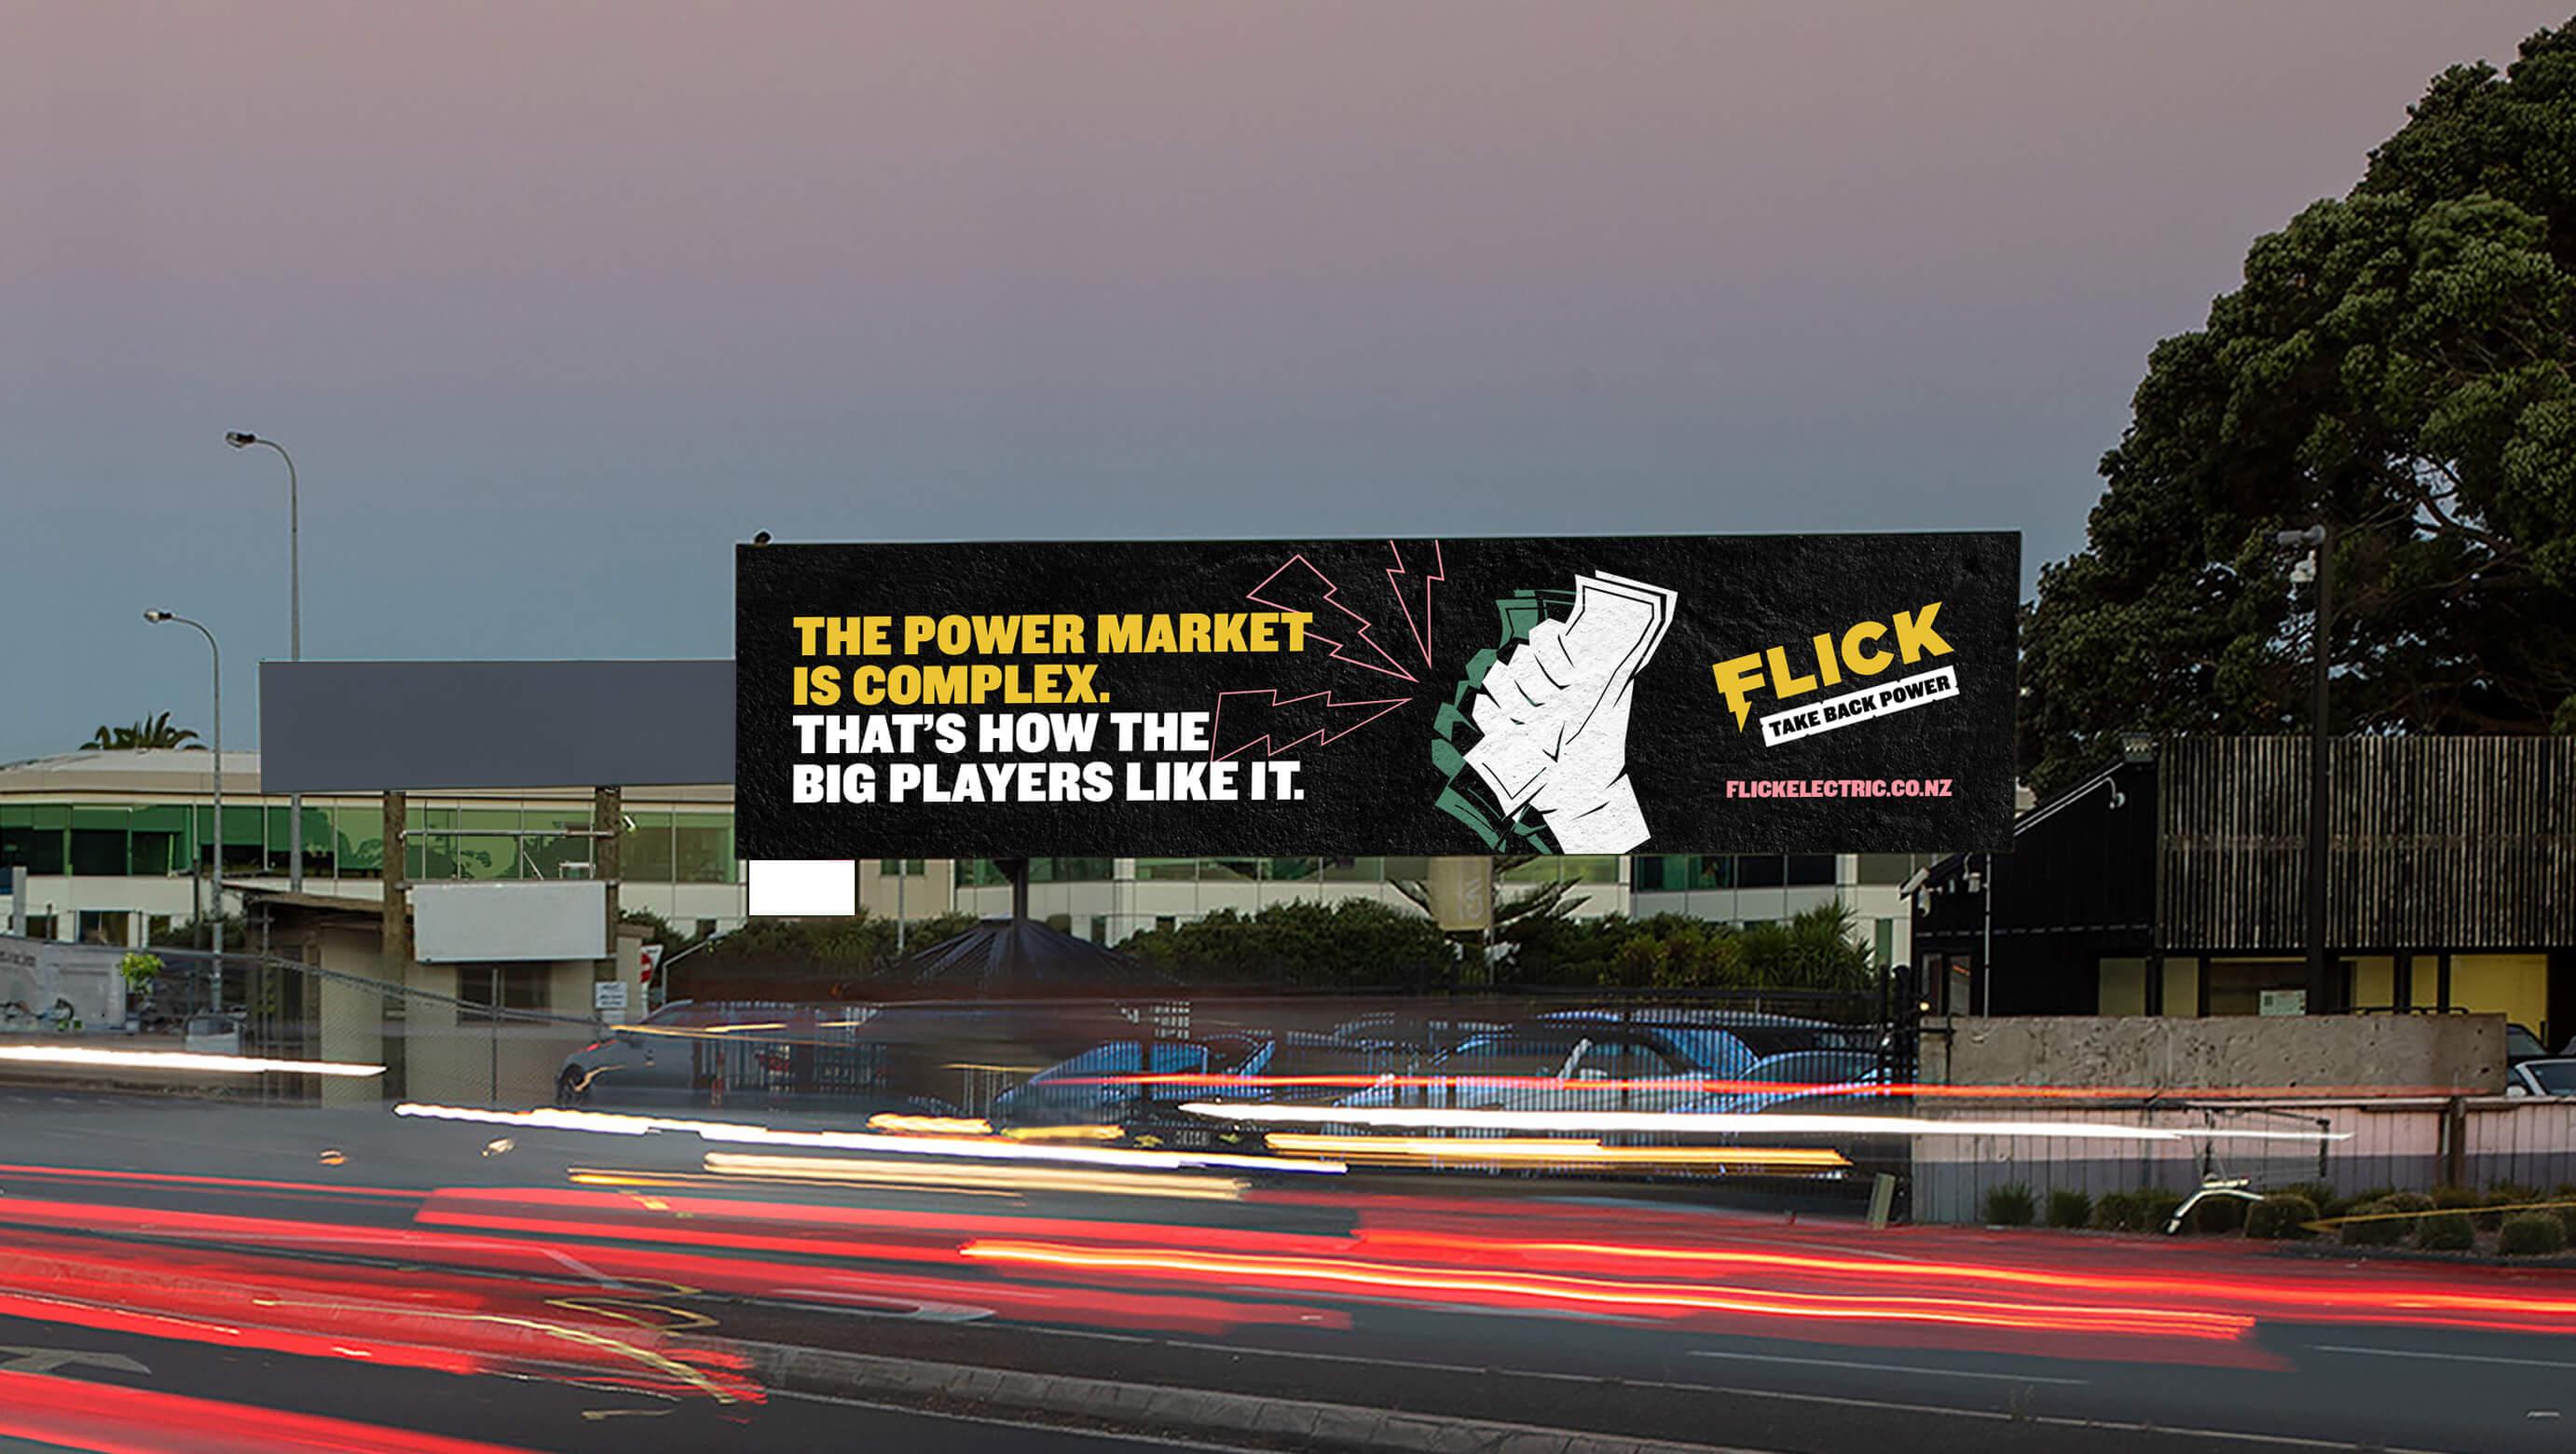 A photograph of our flick energy advertisement displayed on a digital billboard.